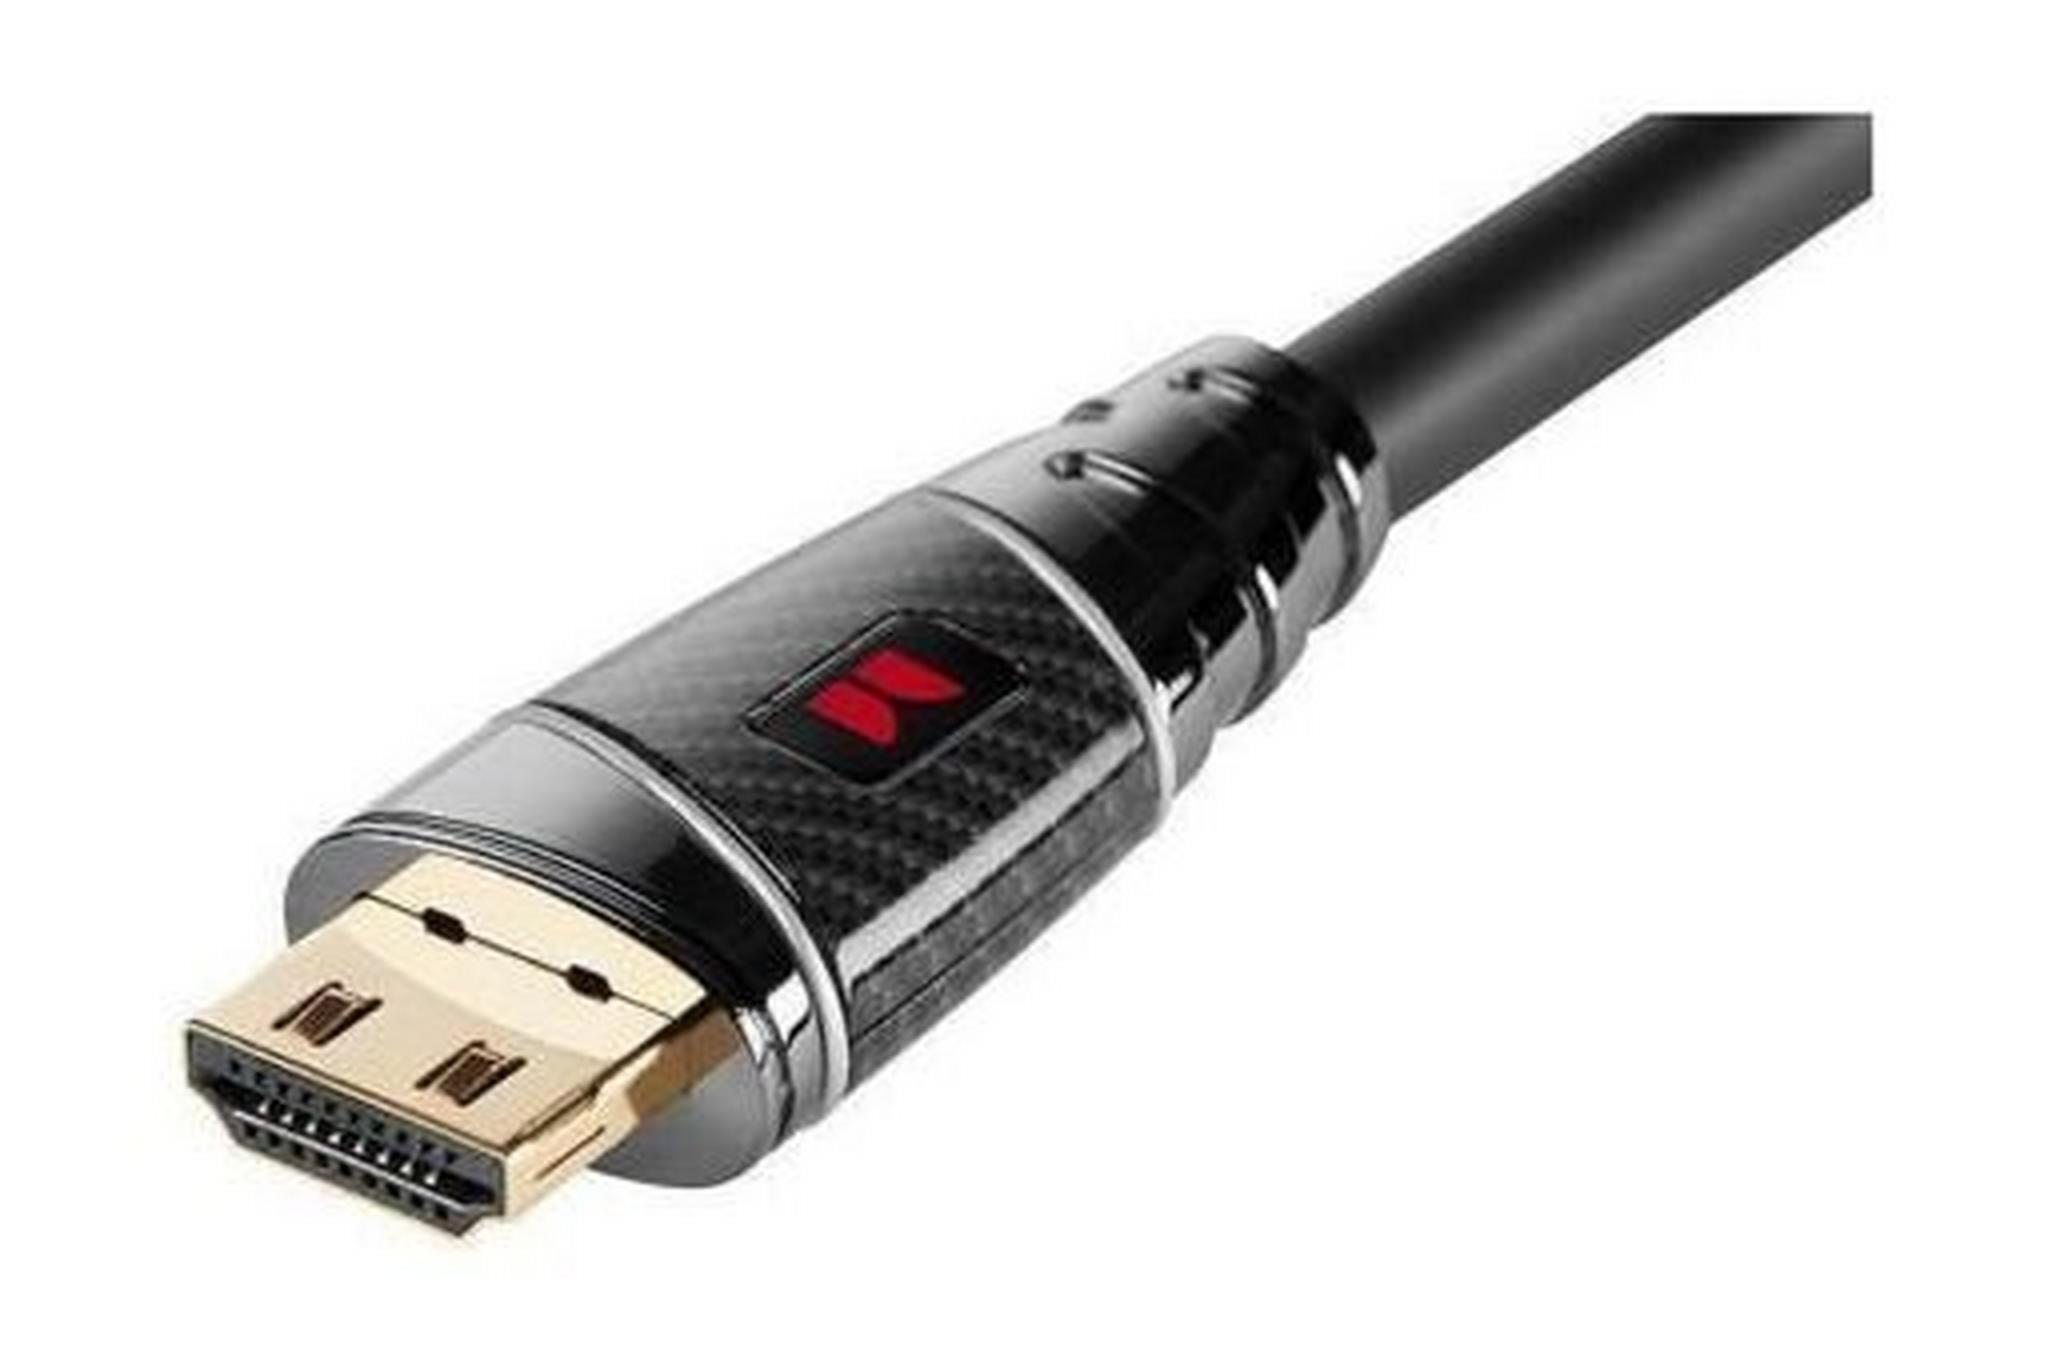 Monster Cable Ultra HD Platinum Series 3 Meters HDMI Cable (PLAT3) - Black